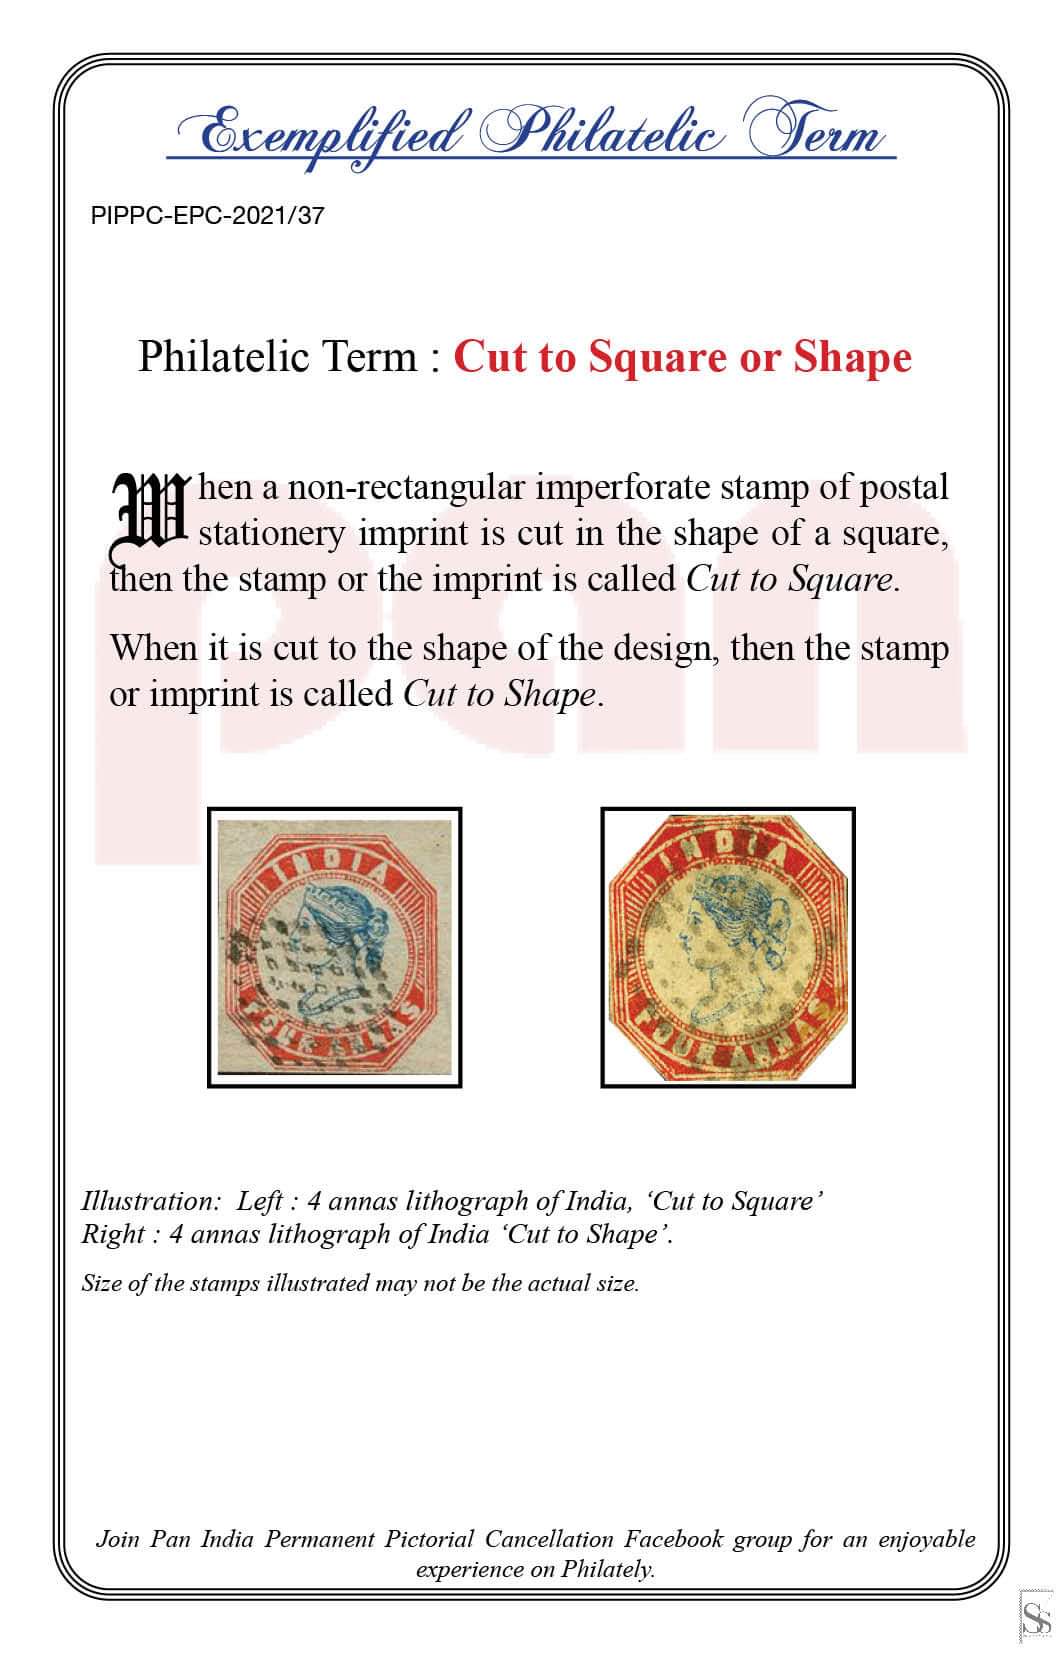 37. Today's Exemplified Philatelic term- Cut to Square or Shape